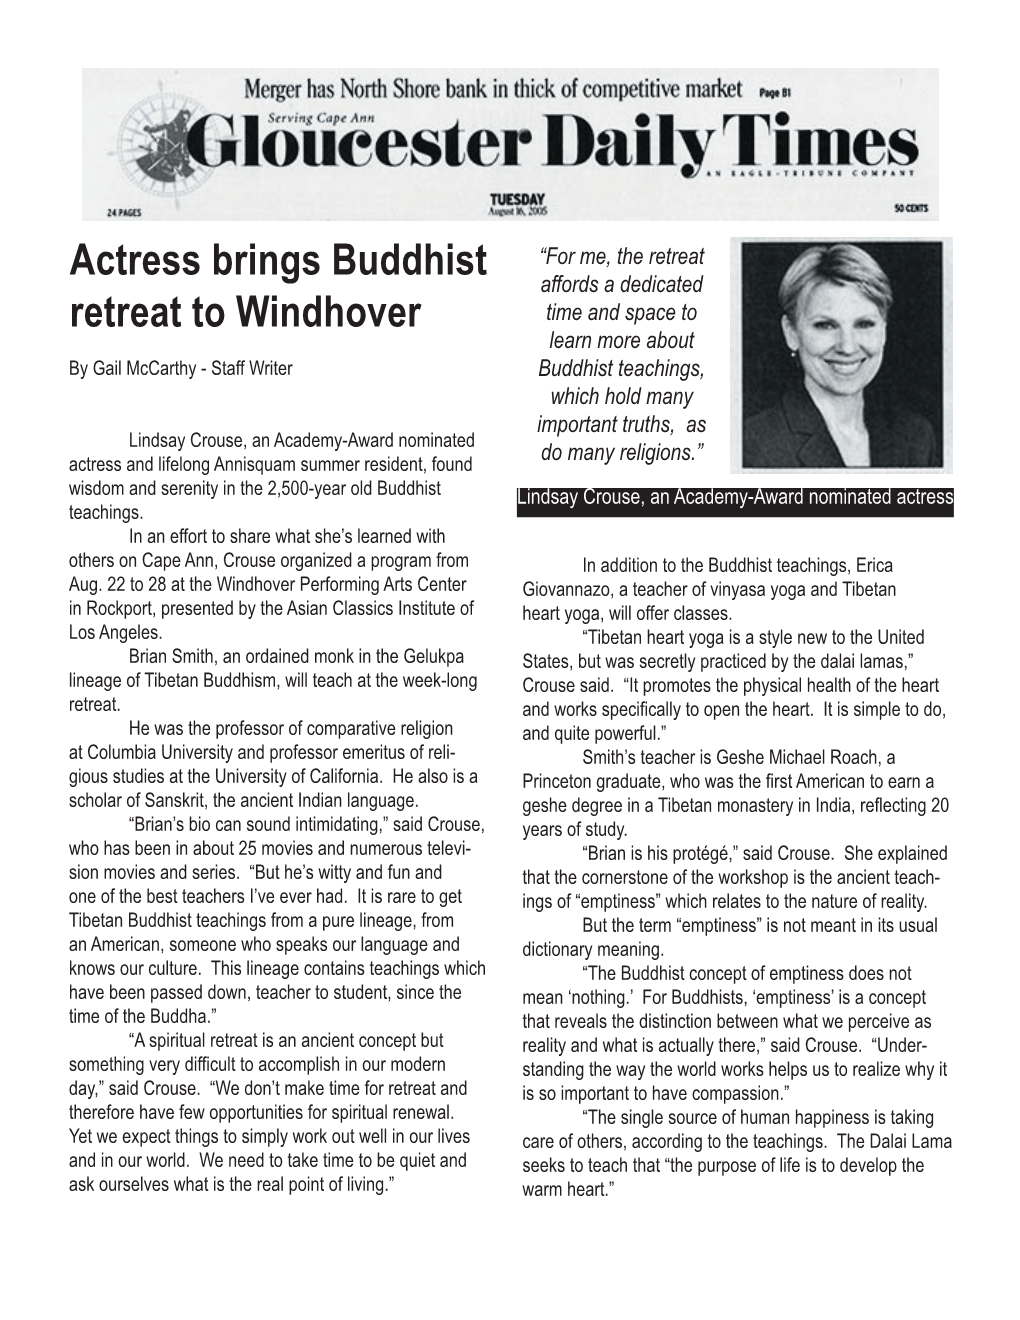 Actress Brings Buddhist Retreat to Windhover